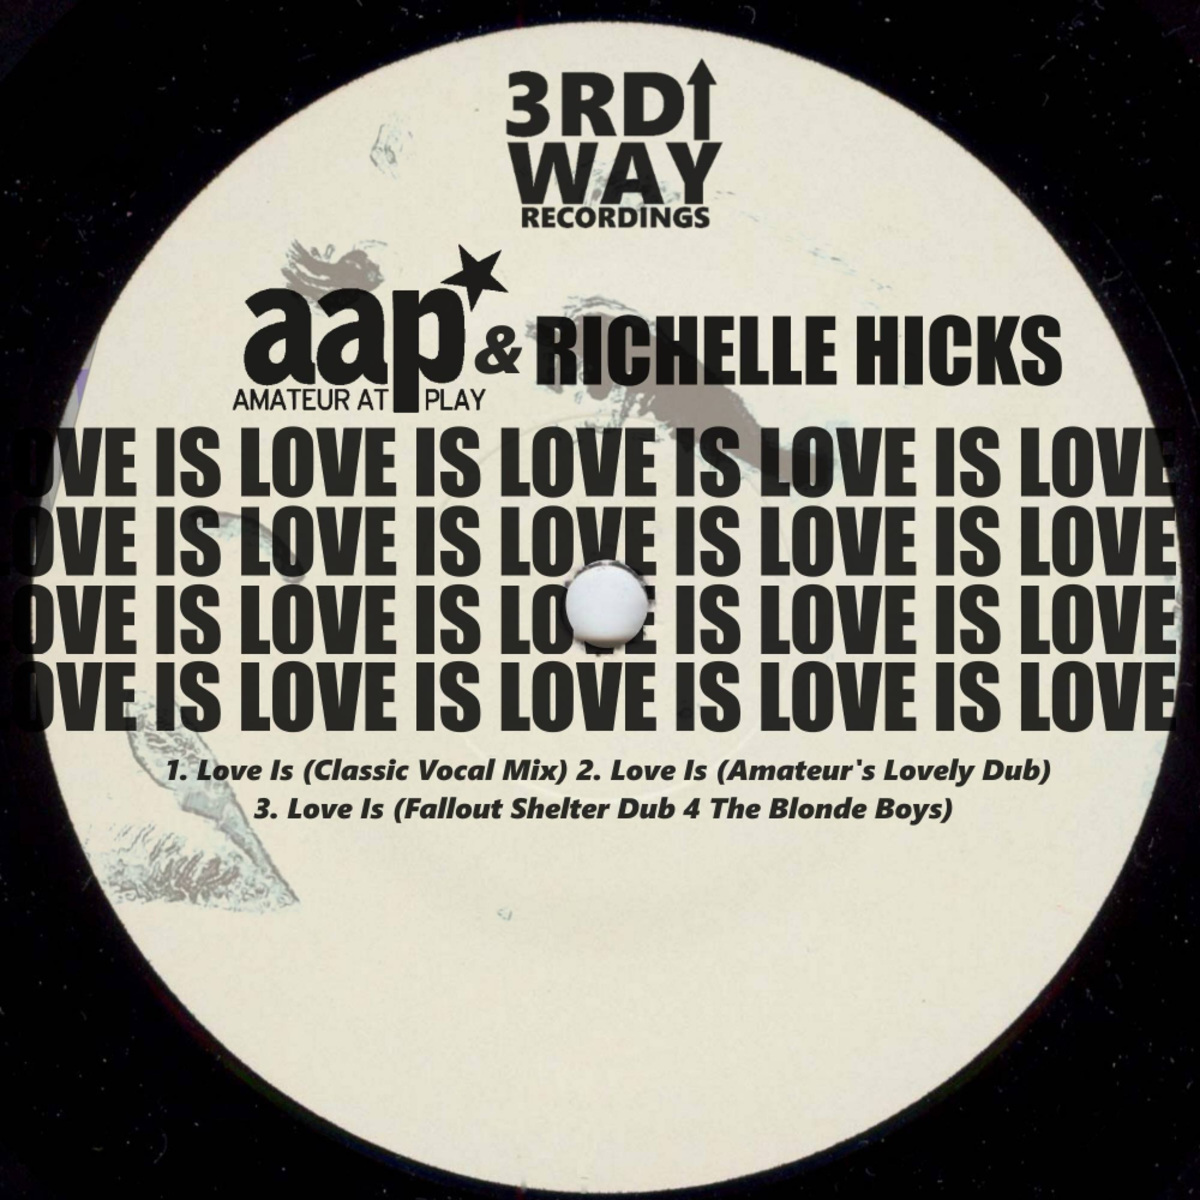 Amateur At Play & Richelle Hicks - Love Is / 3rd Way Recordings